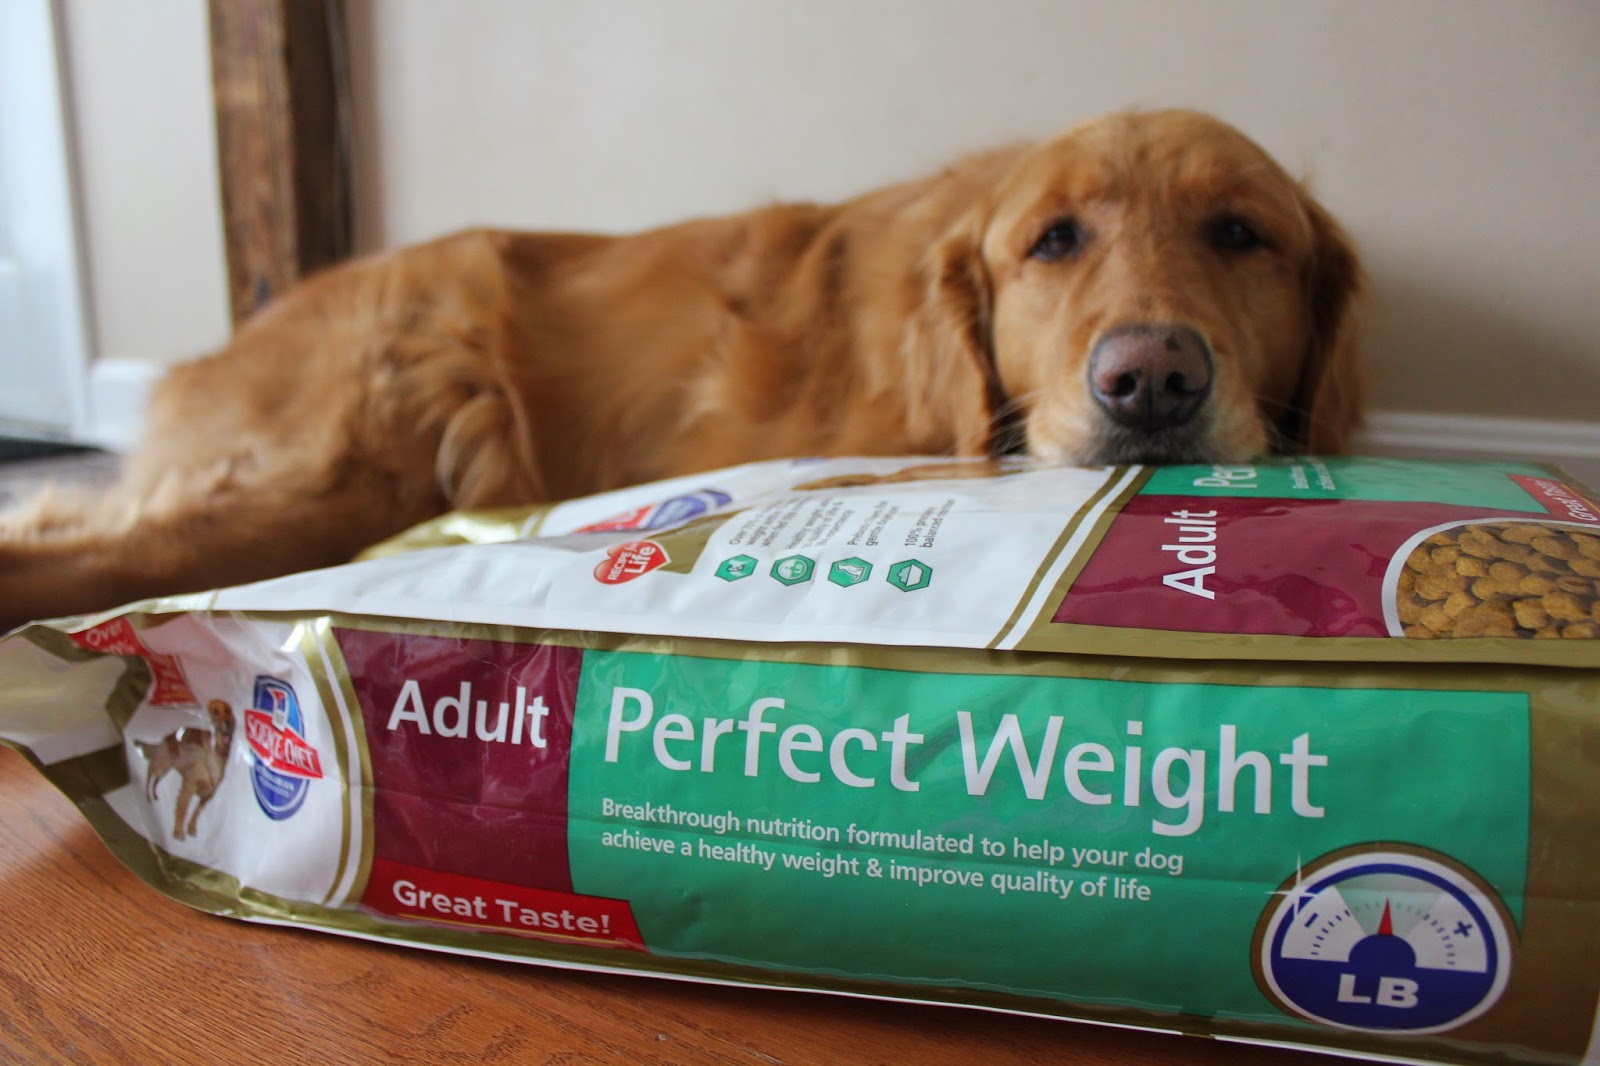 dog transition to Science Diet dog food for weight loss